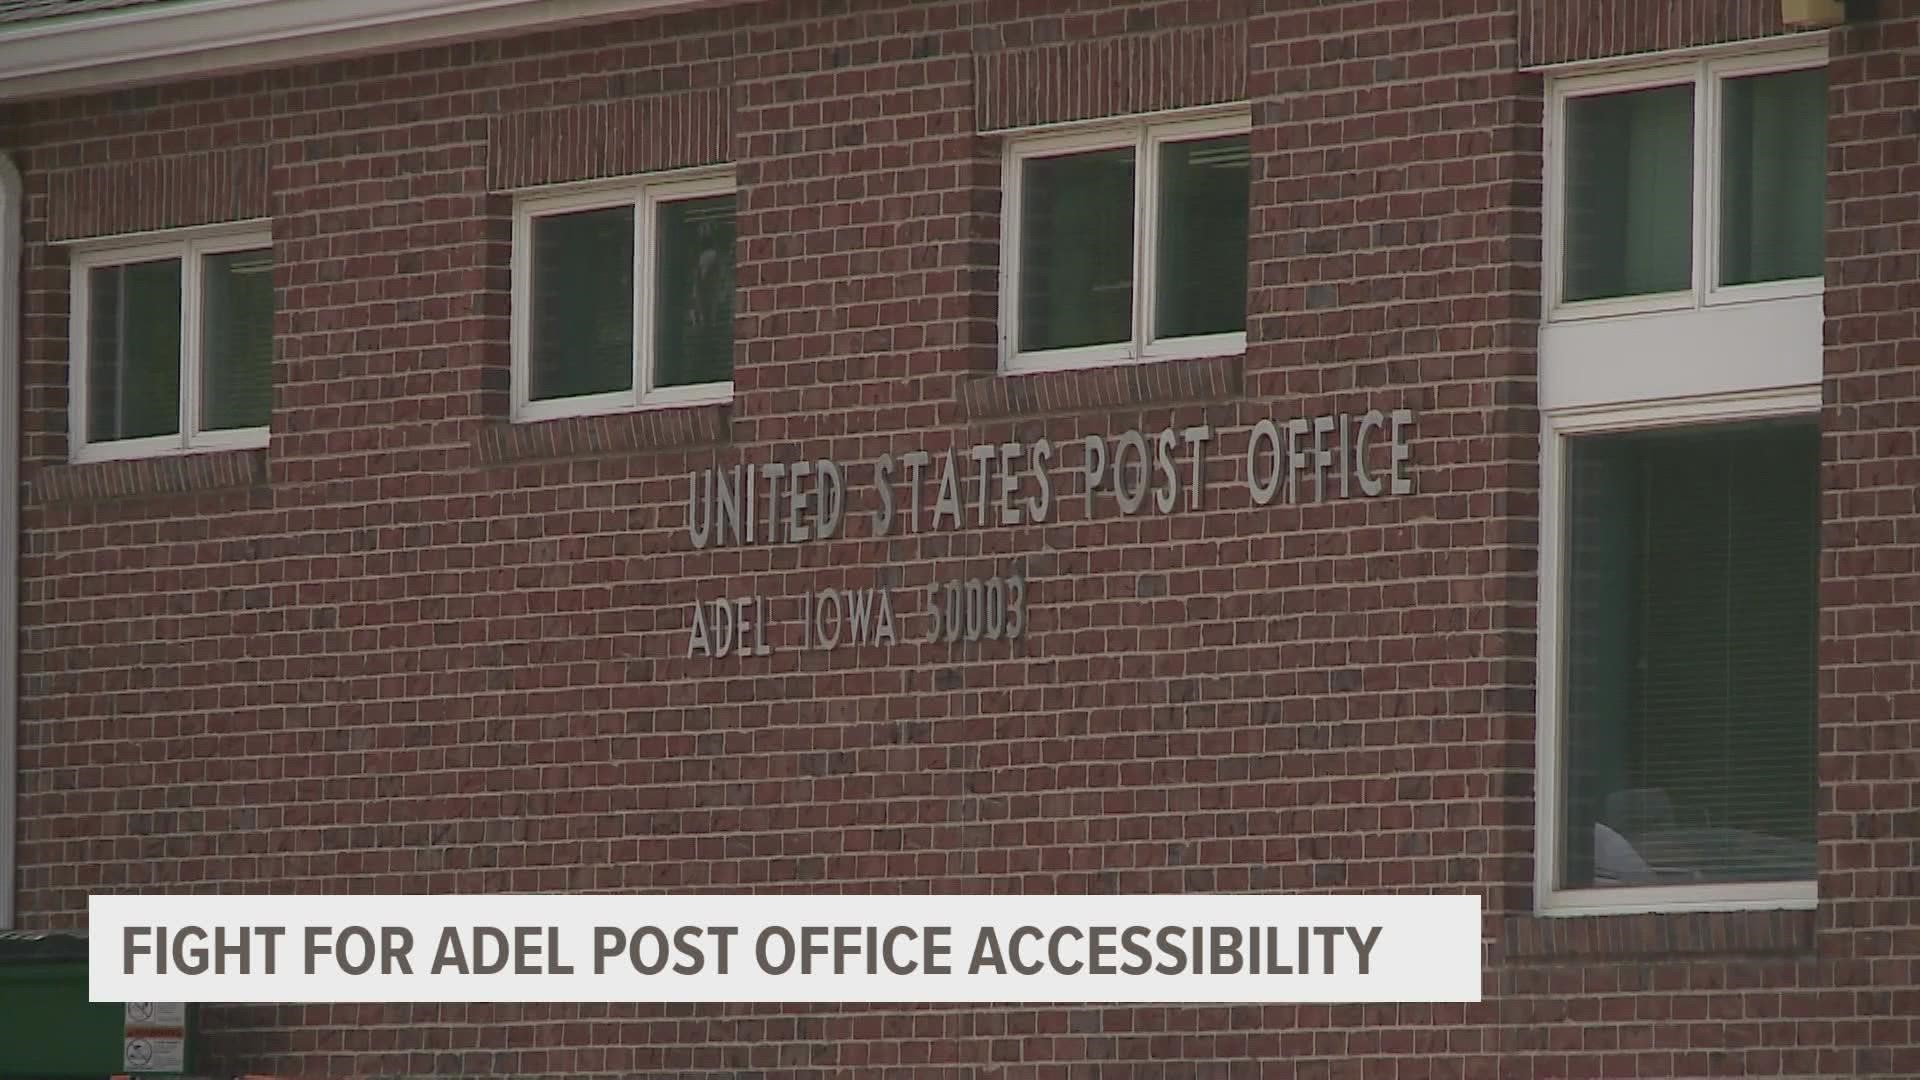 Robert Fisher is requesting that the privately-owned Adel Post Office installs a handicap button so the facility is more accessible to wheelchair users like him.